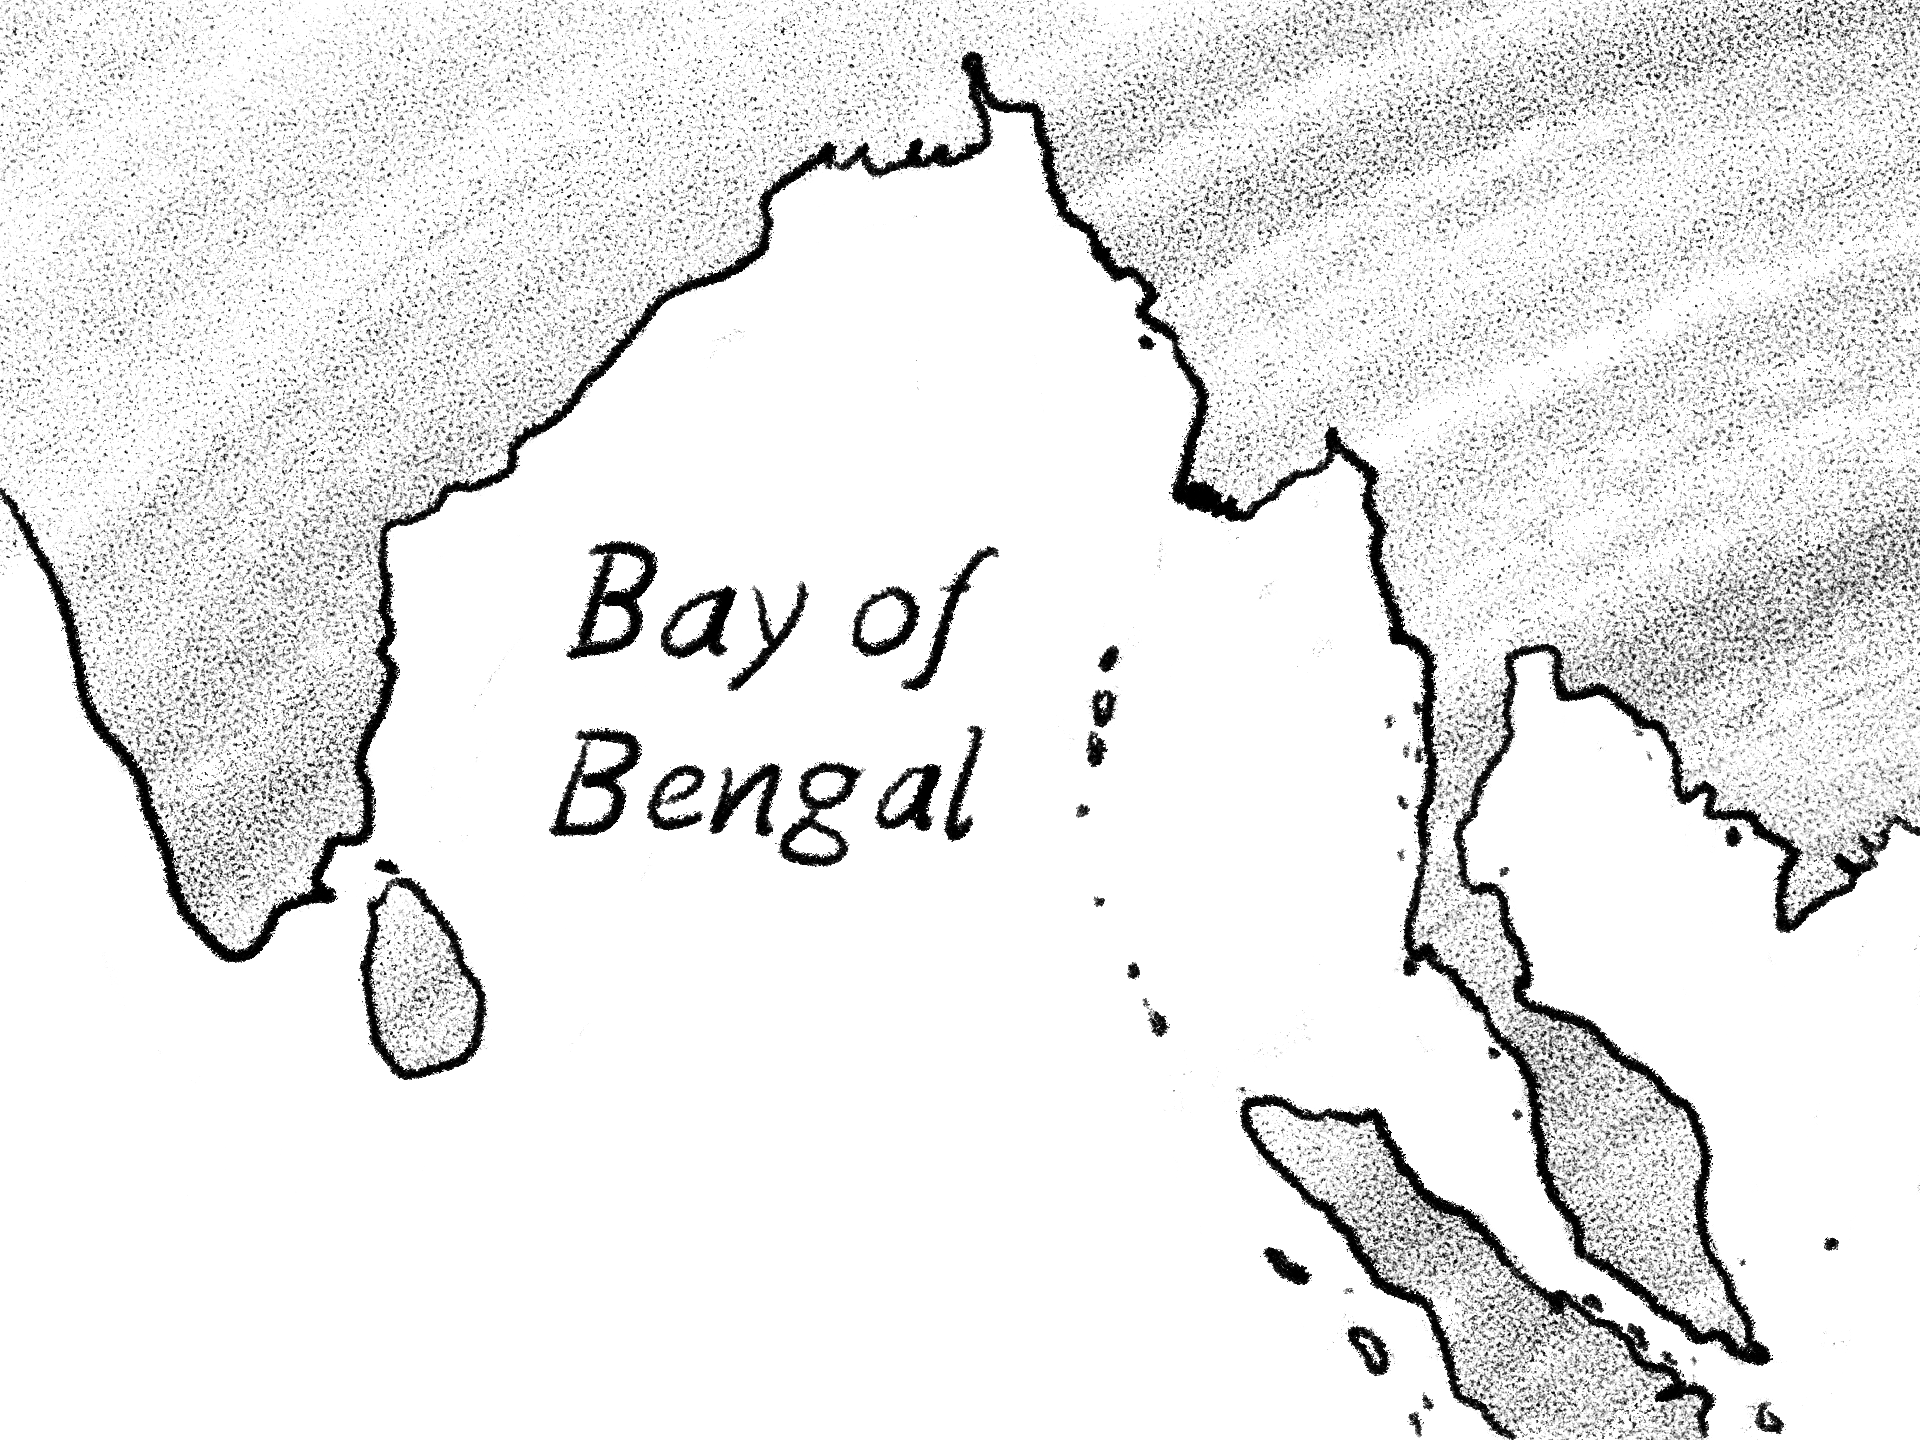 Cover of Select Crossing the Bay of Bengal with You Crossing the Bay of Bengal with You, a short story